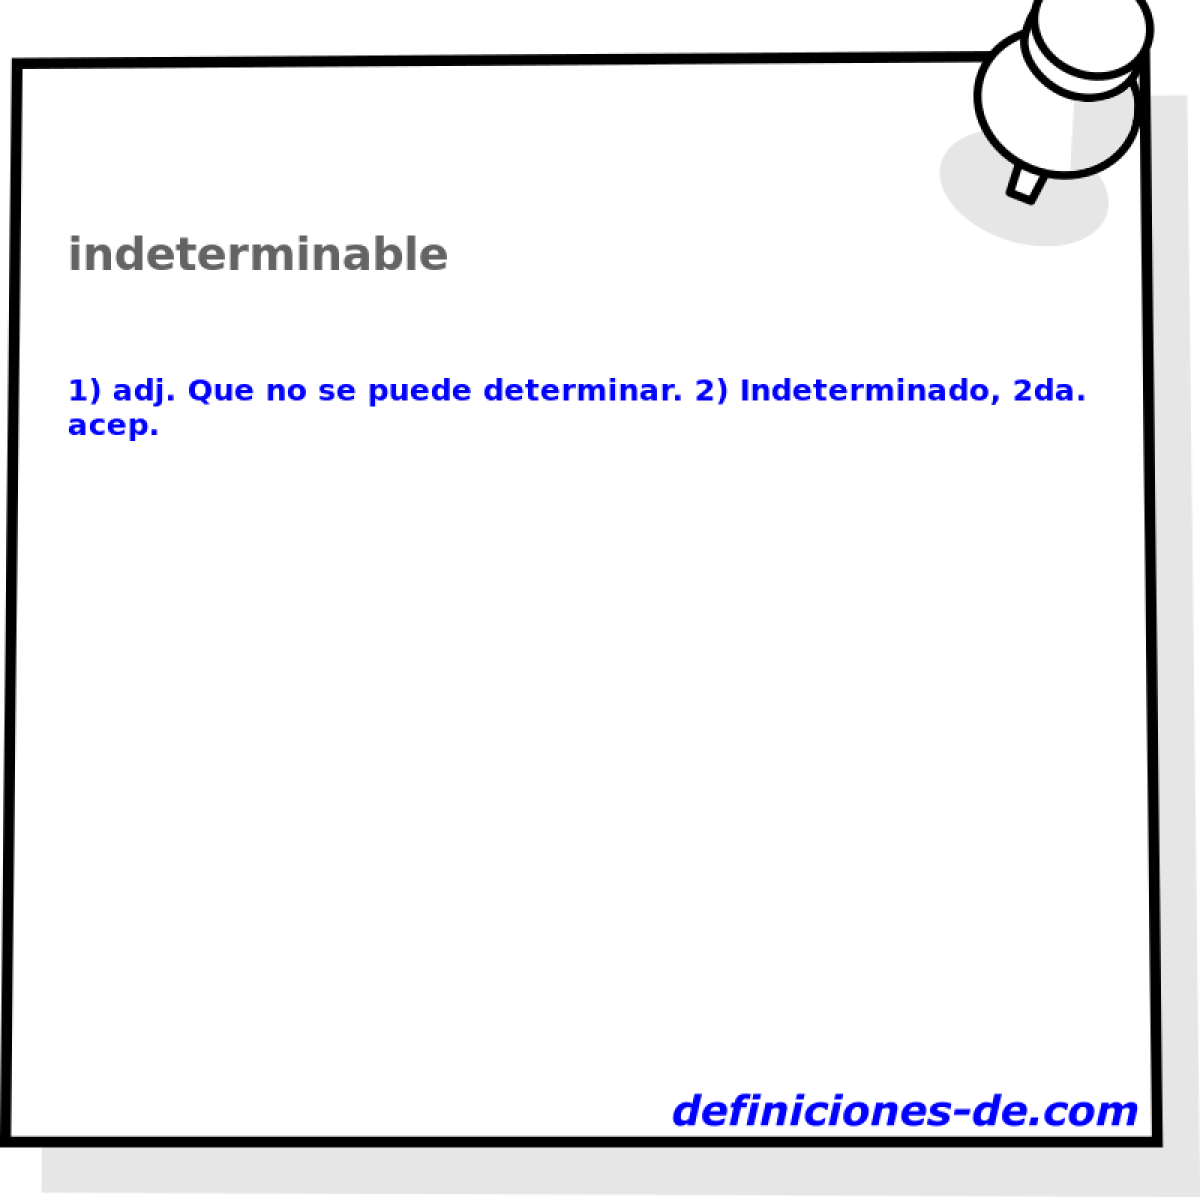 indeterminable 